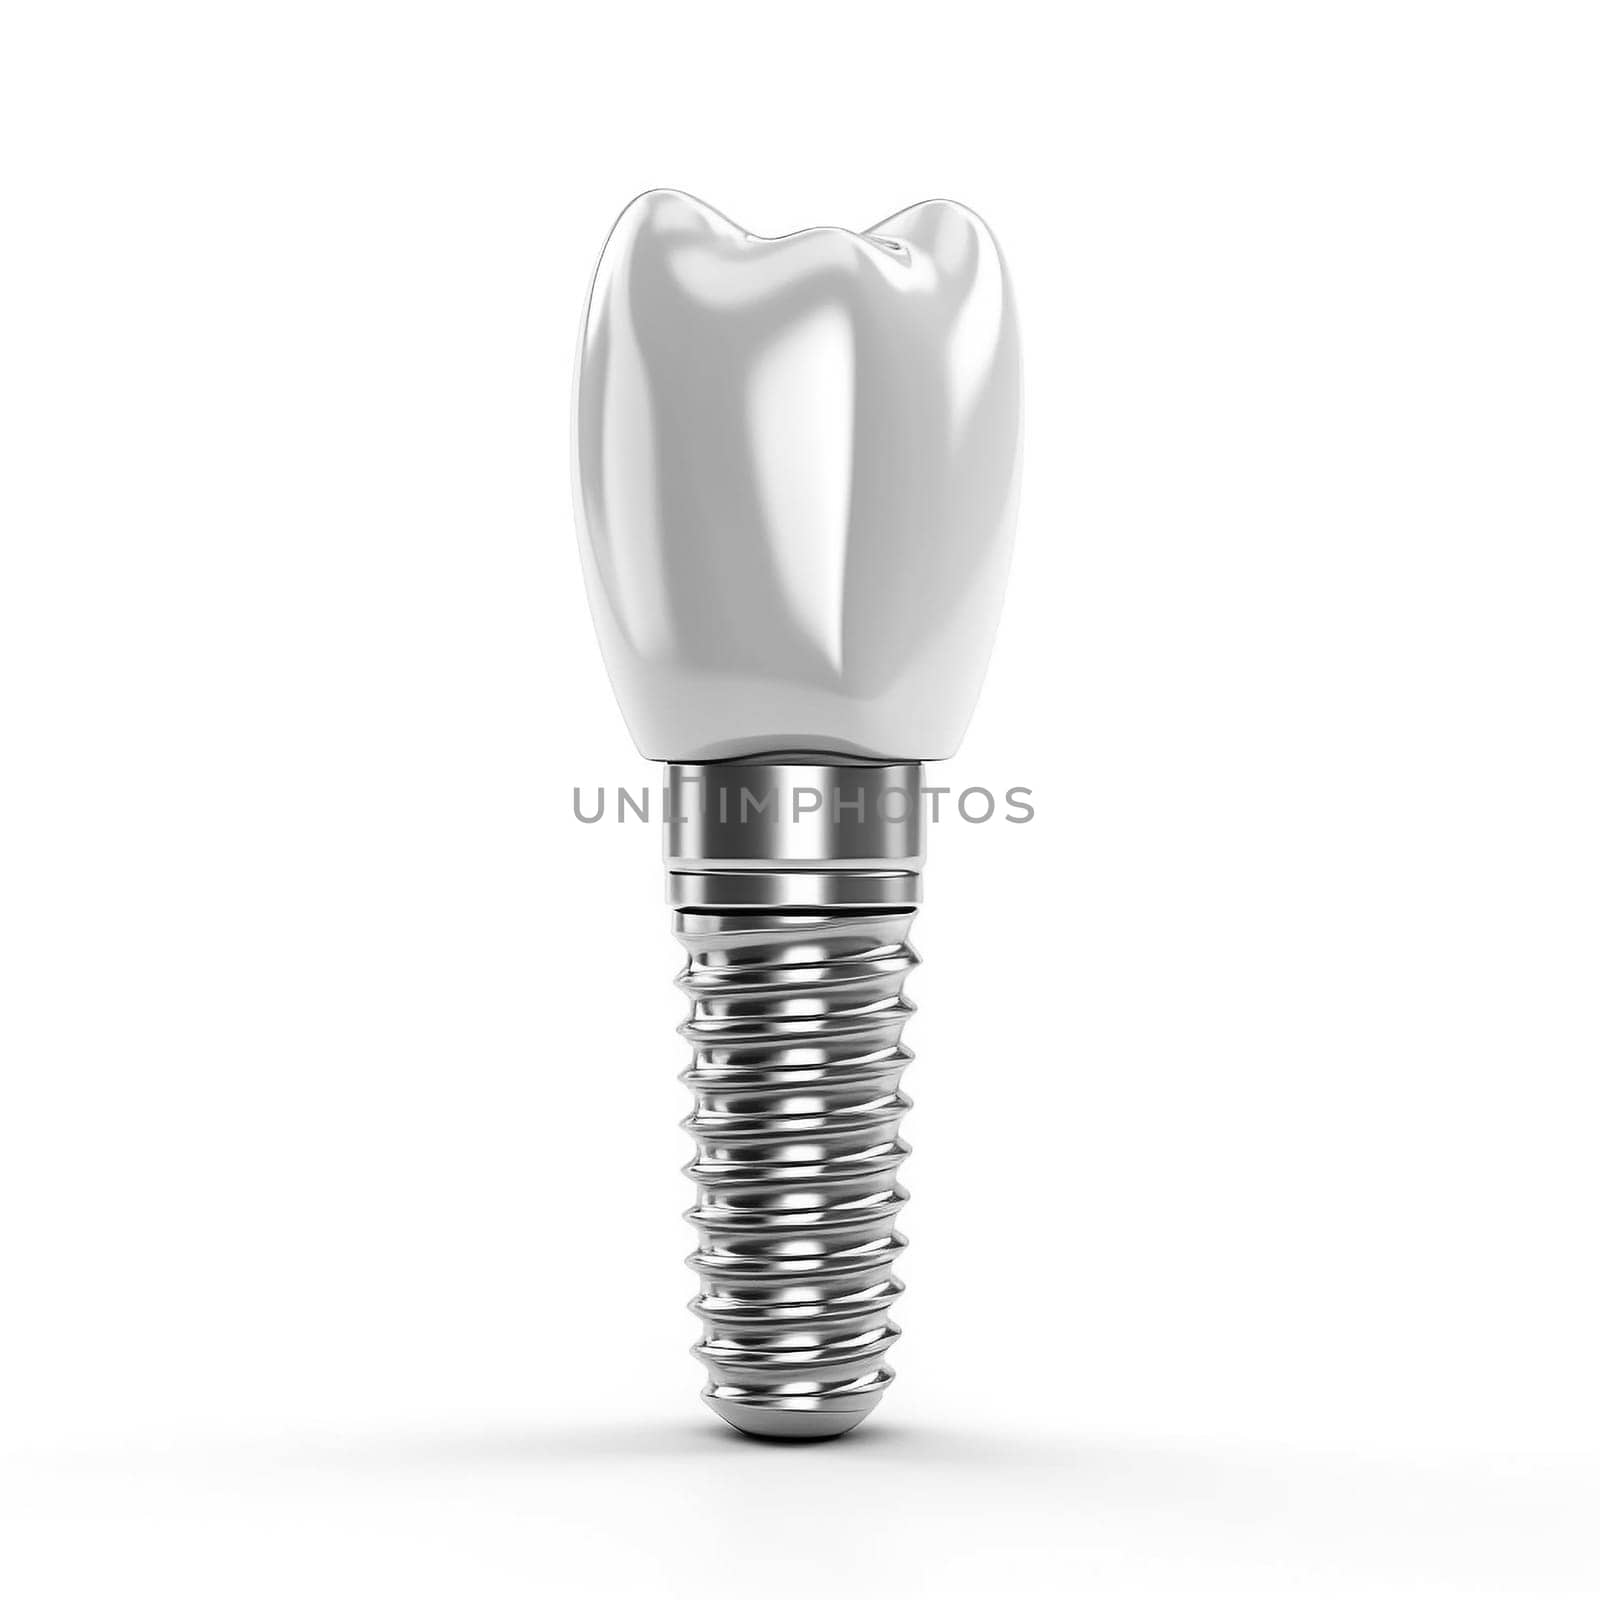 3D illustration of tooth implant on white background, dental concept